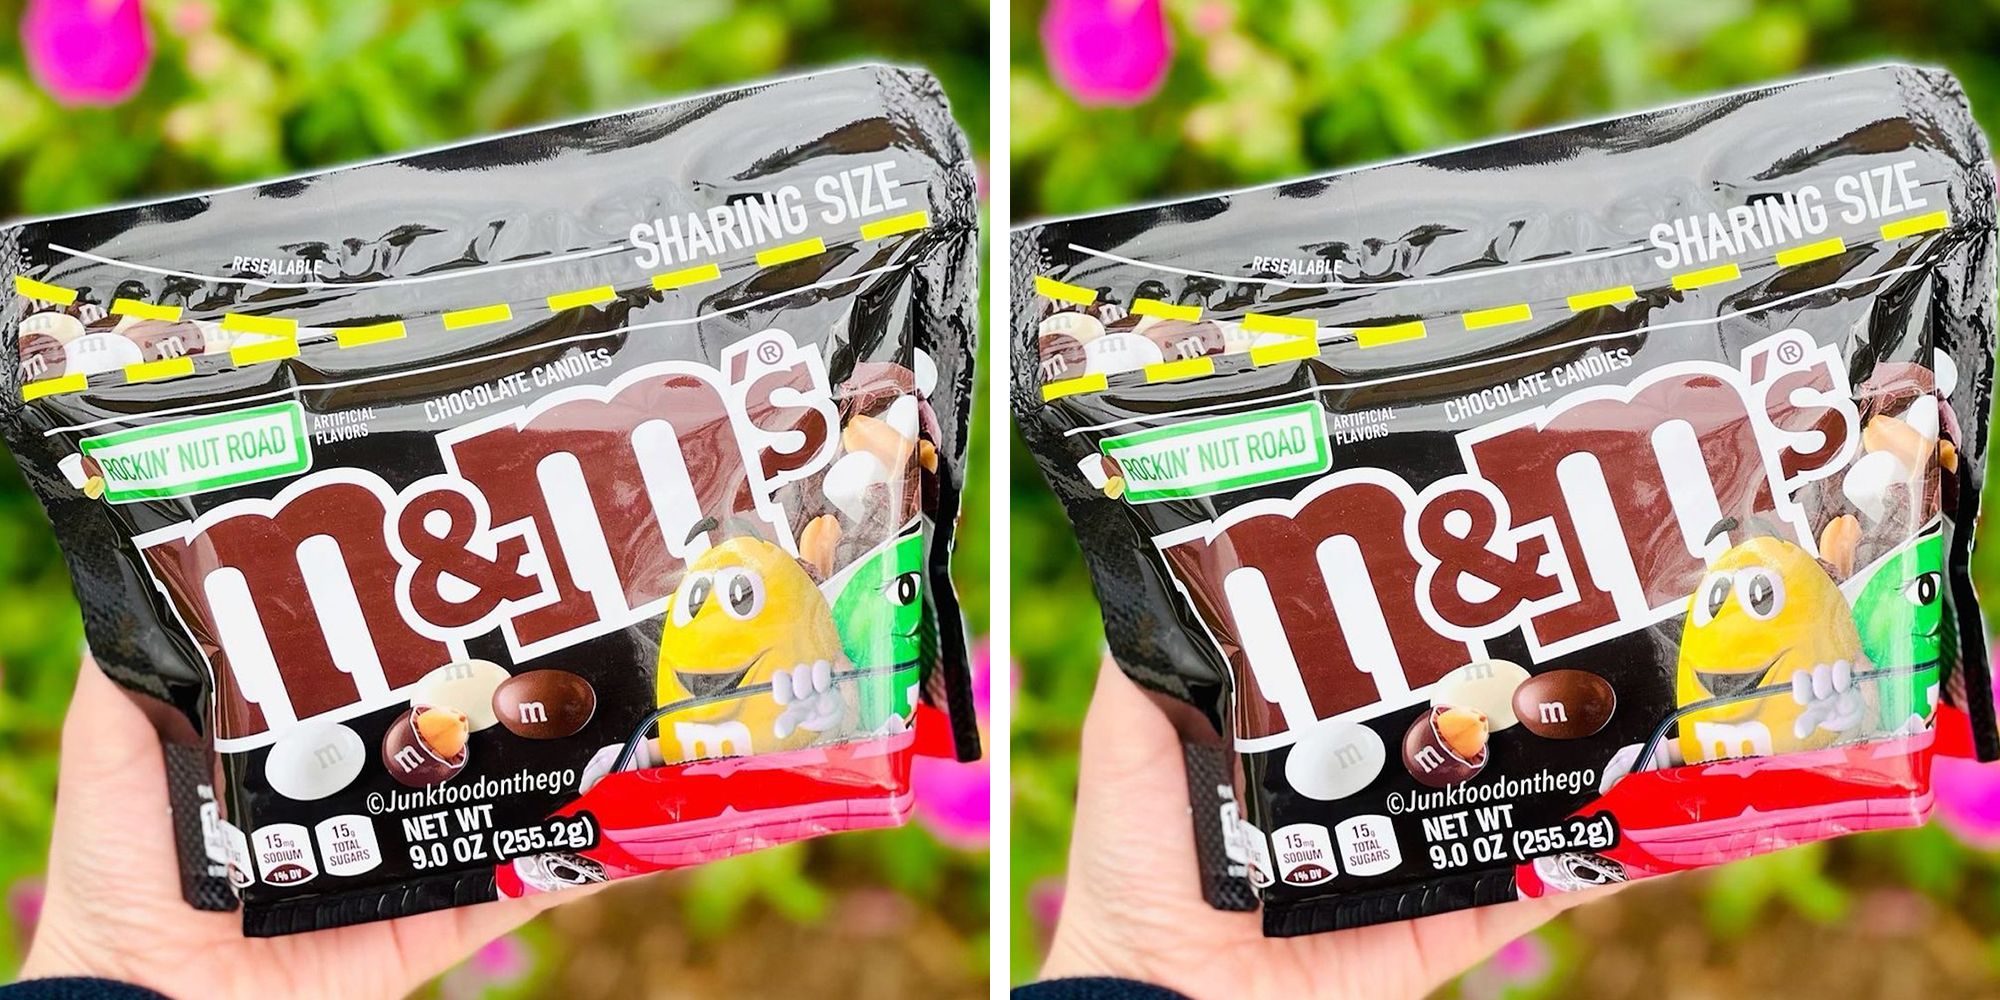 M&M's New Rockin' Nut Road Candy Is Filled With Marshmallow Flavor